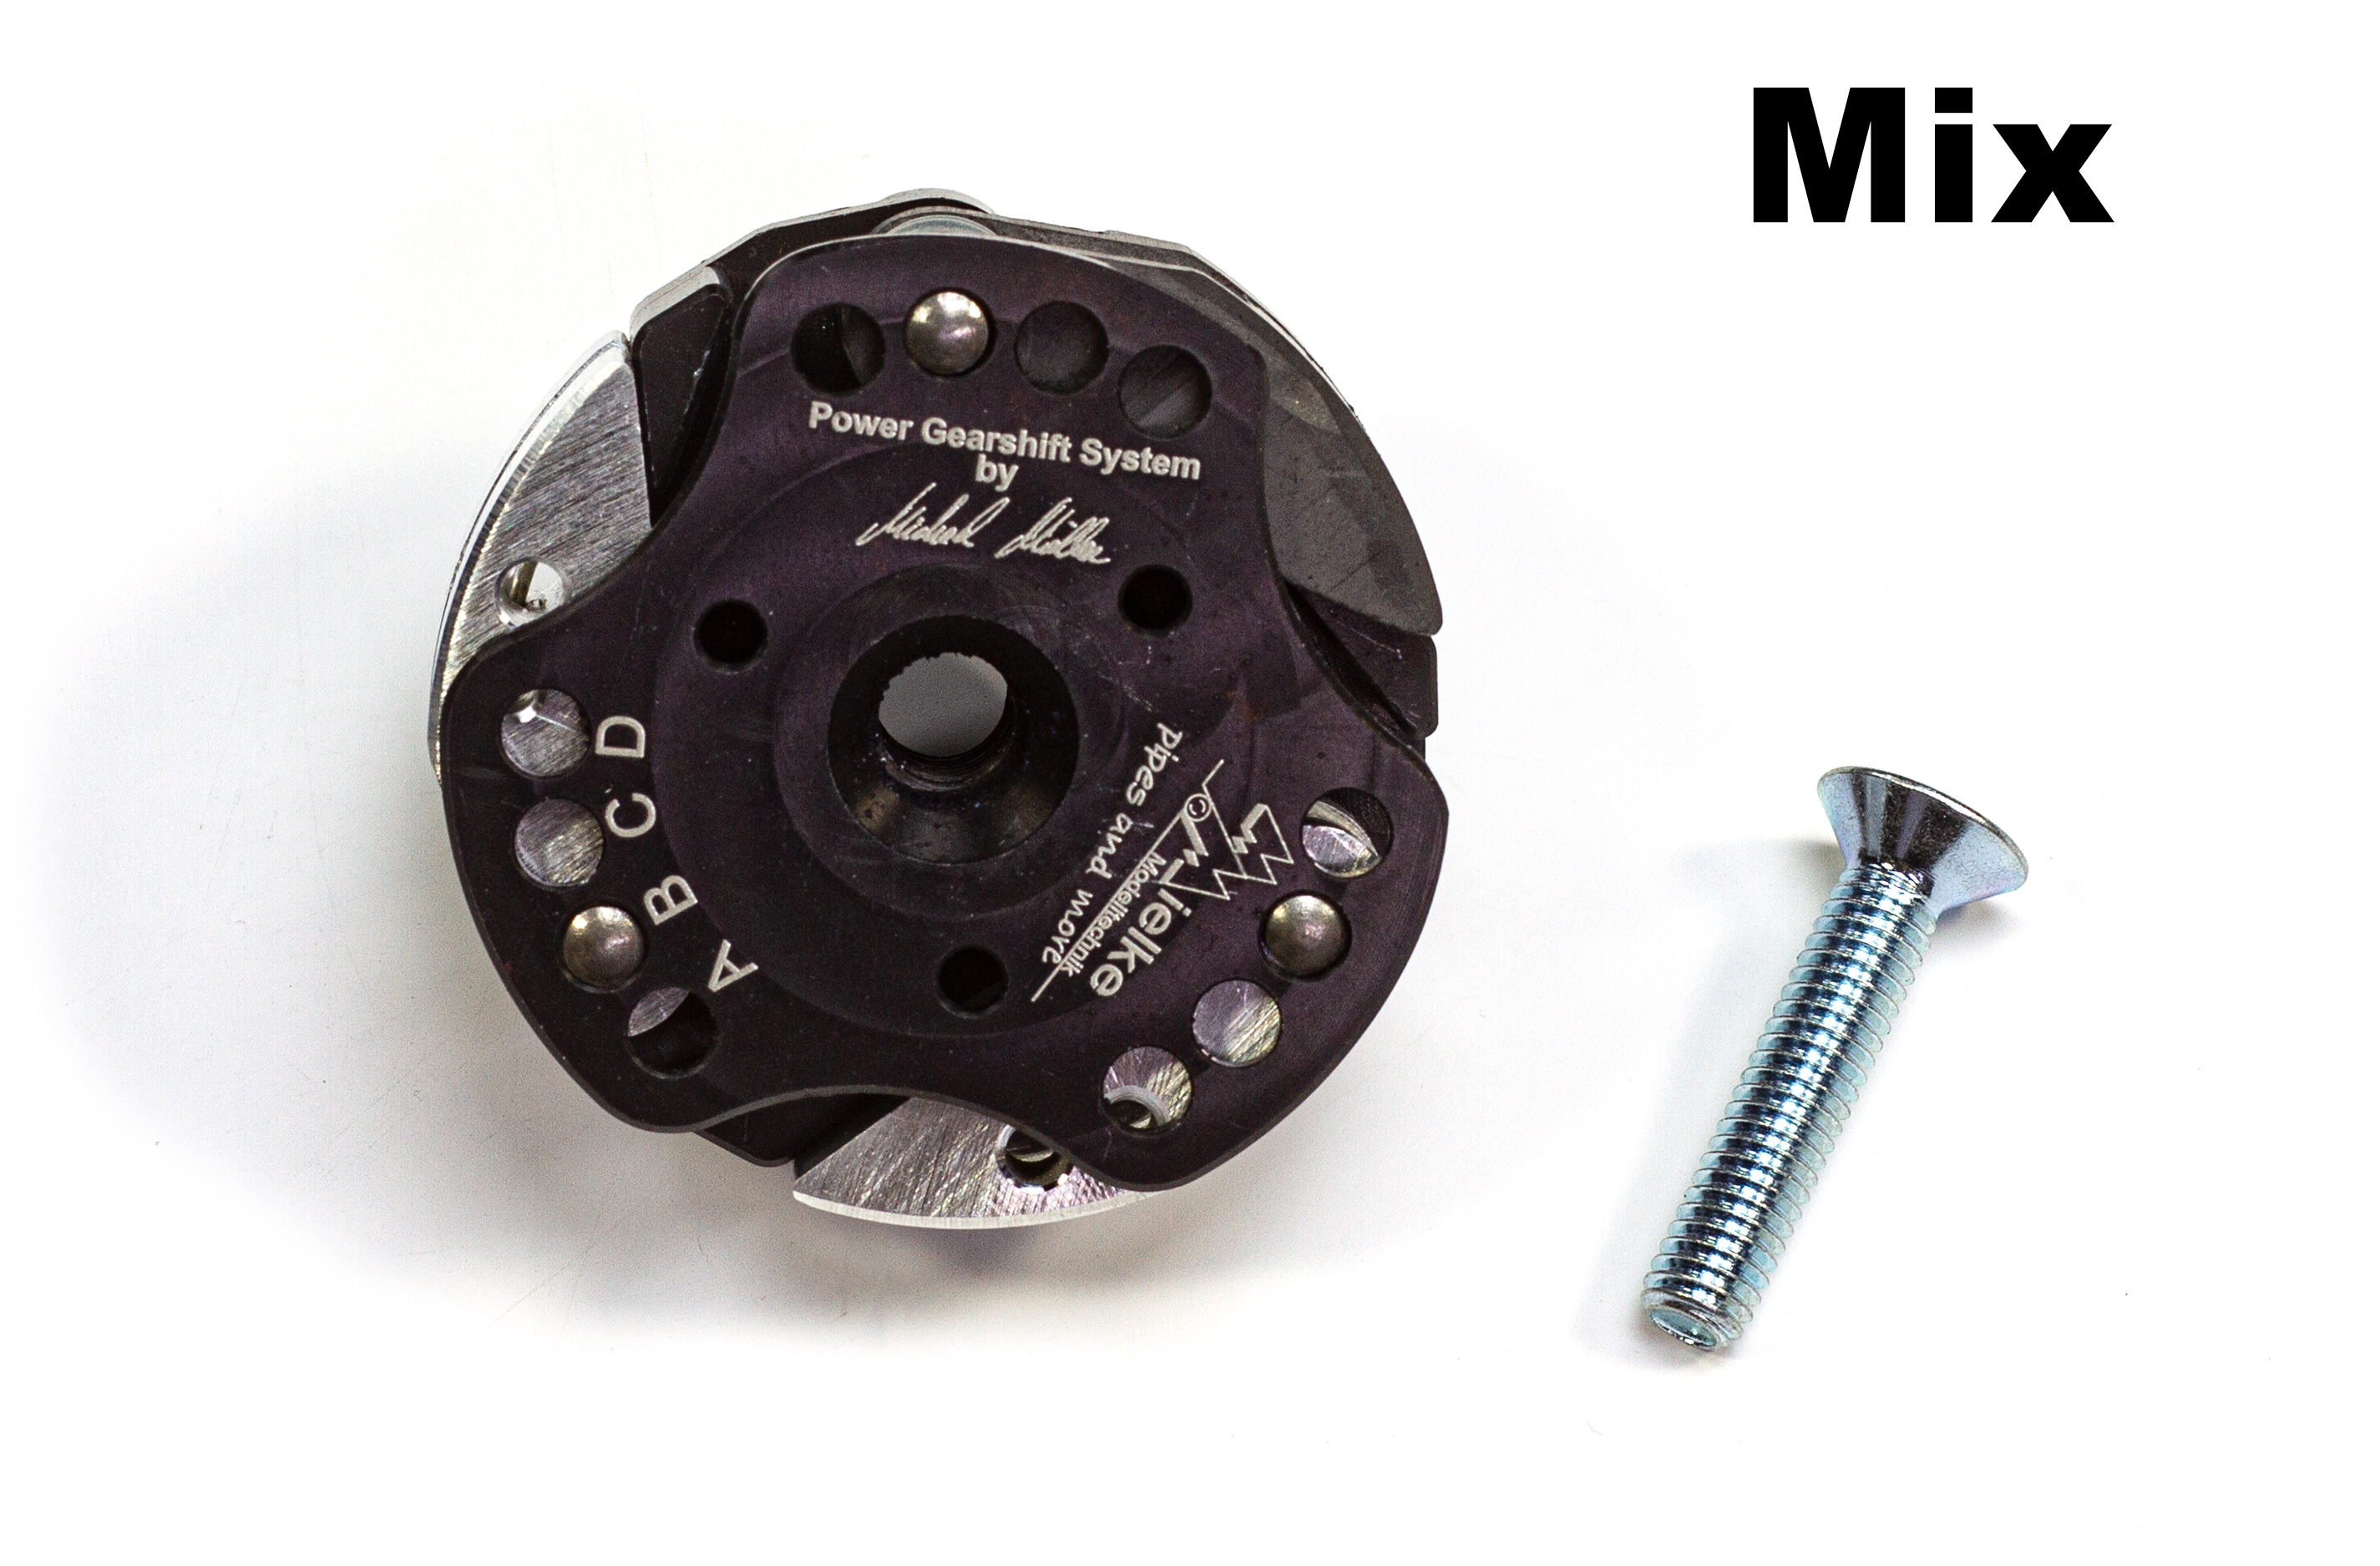 Mielke 5741 Power Gearshift clutch for FG (not for Formel 1+Evo2020) Harm, RS5, HPI, Losi, 2,0mm springs, Mix with long clutch carrier